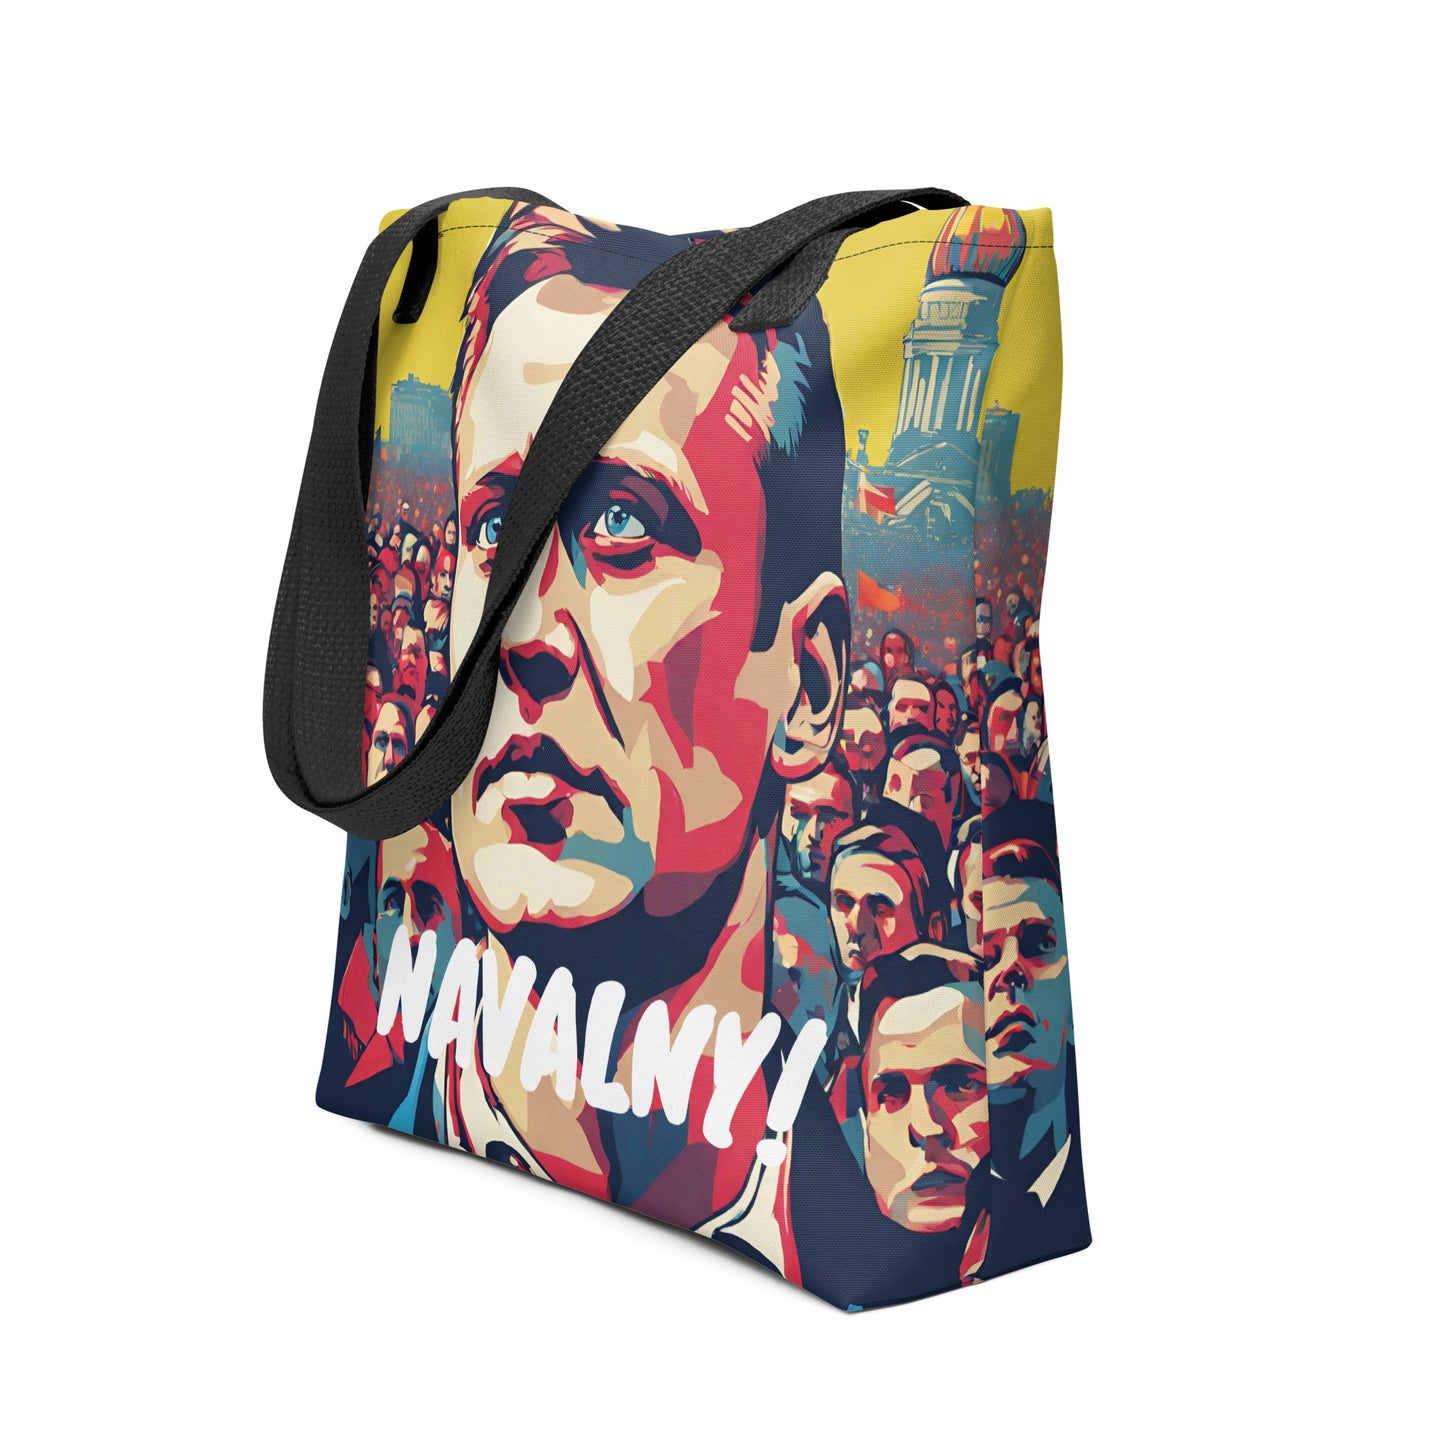 Navalny Strong Tote -  Limited Edition